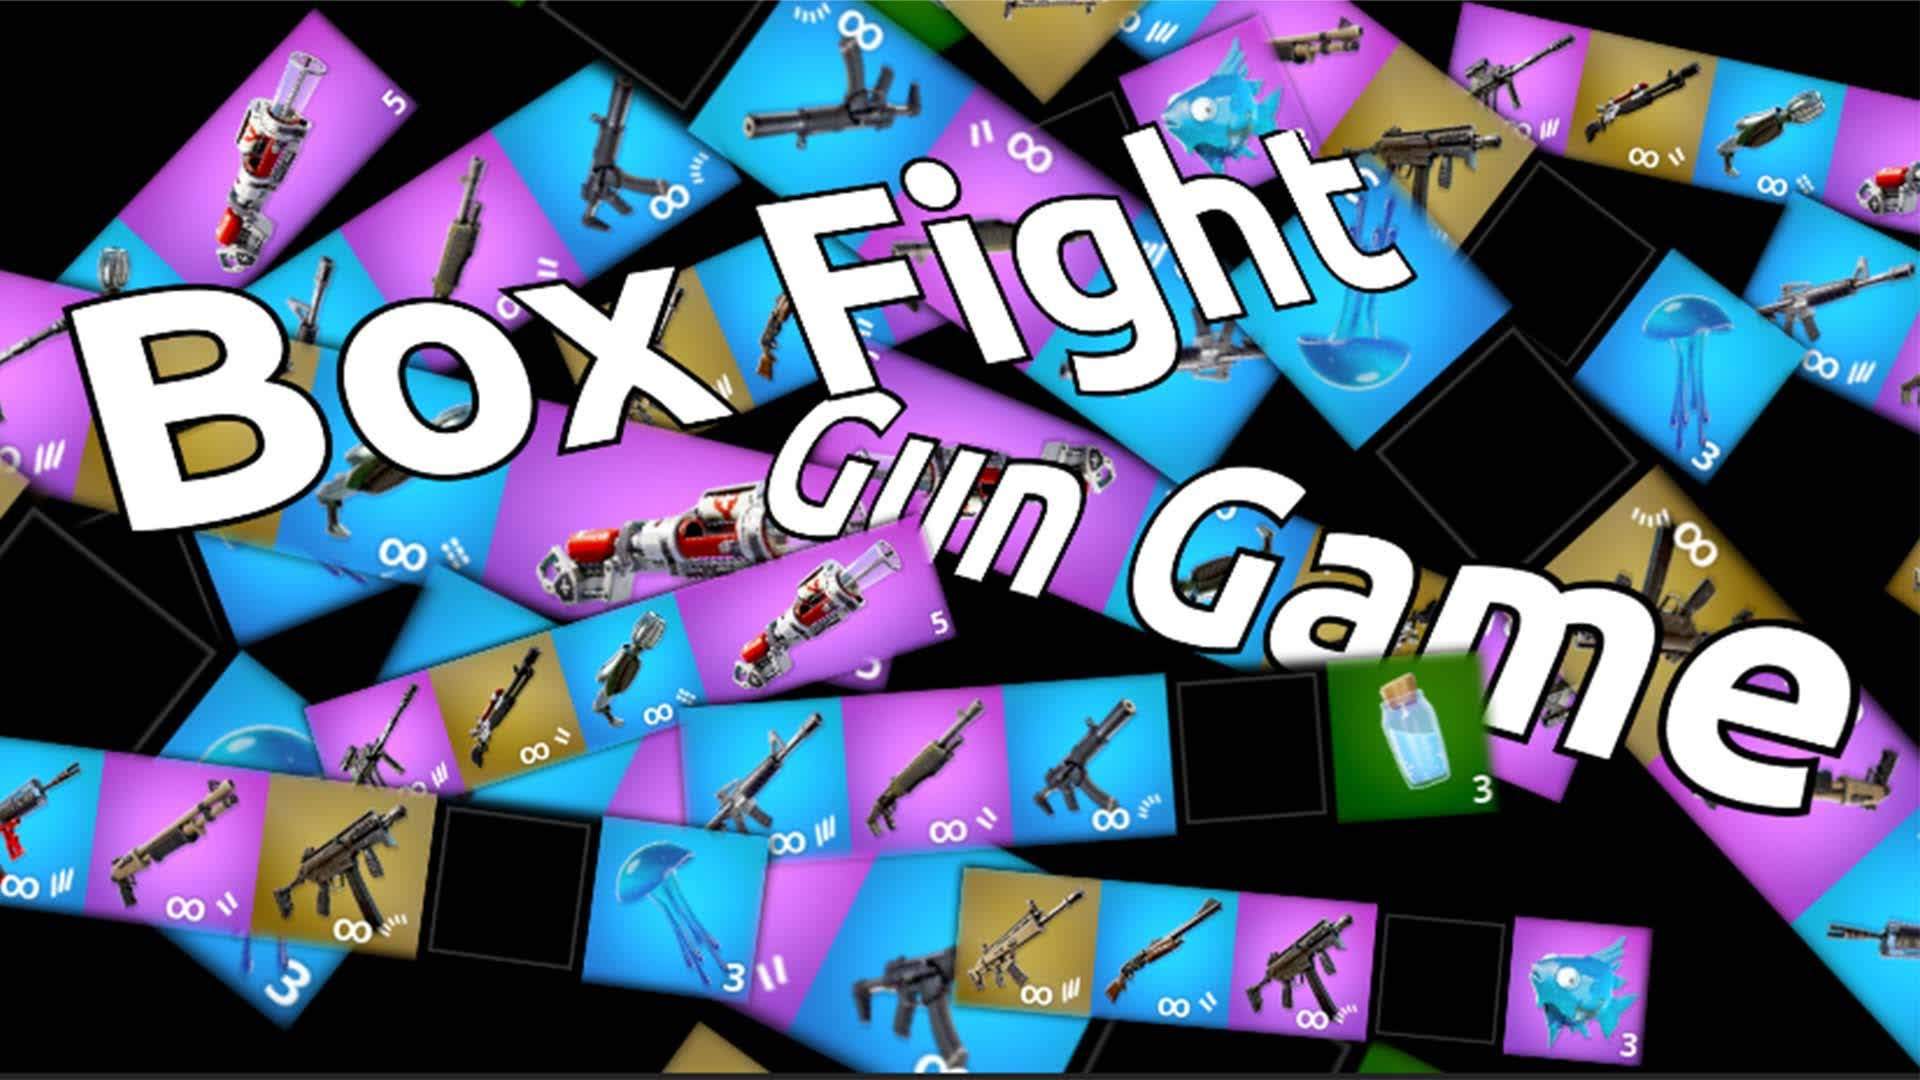 BOX FIGHT GUNGAME! FIRST TO 30 ELMS (XP)